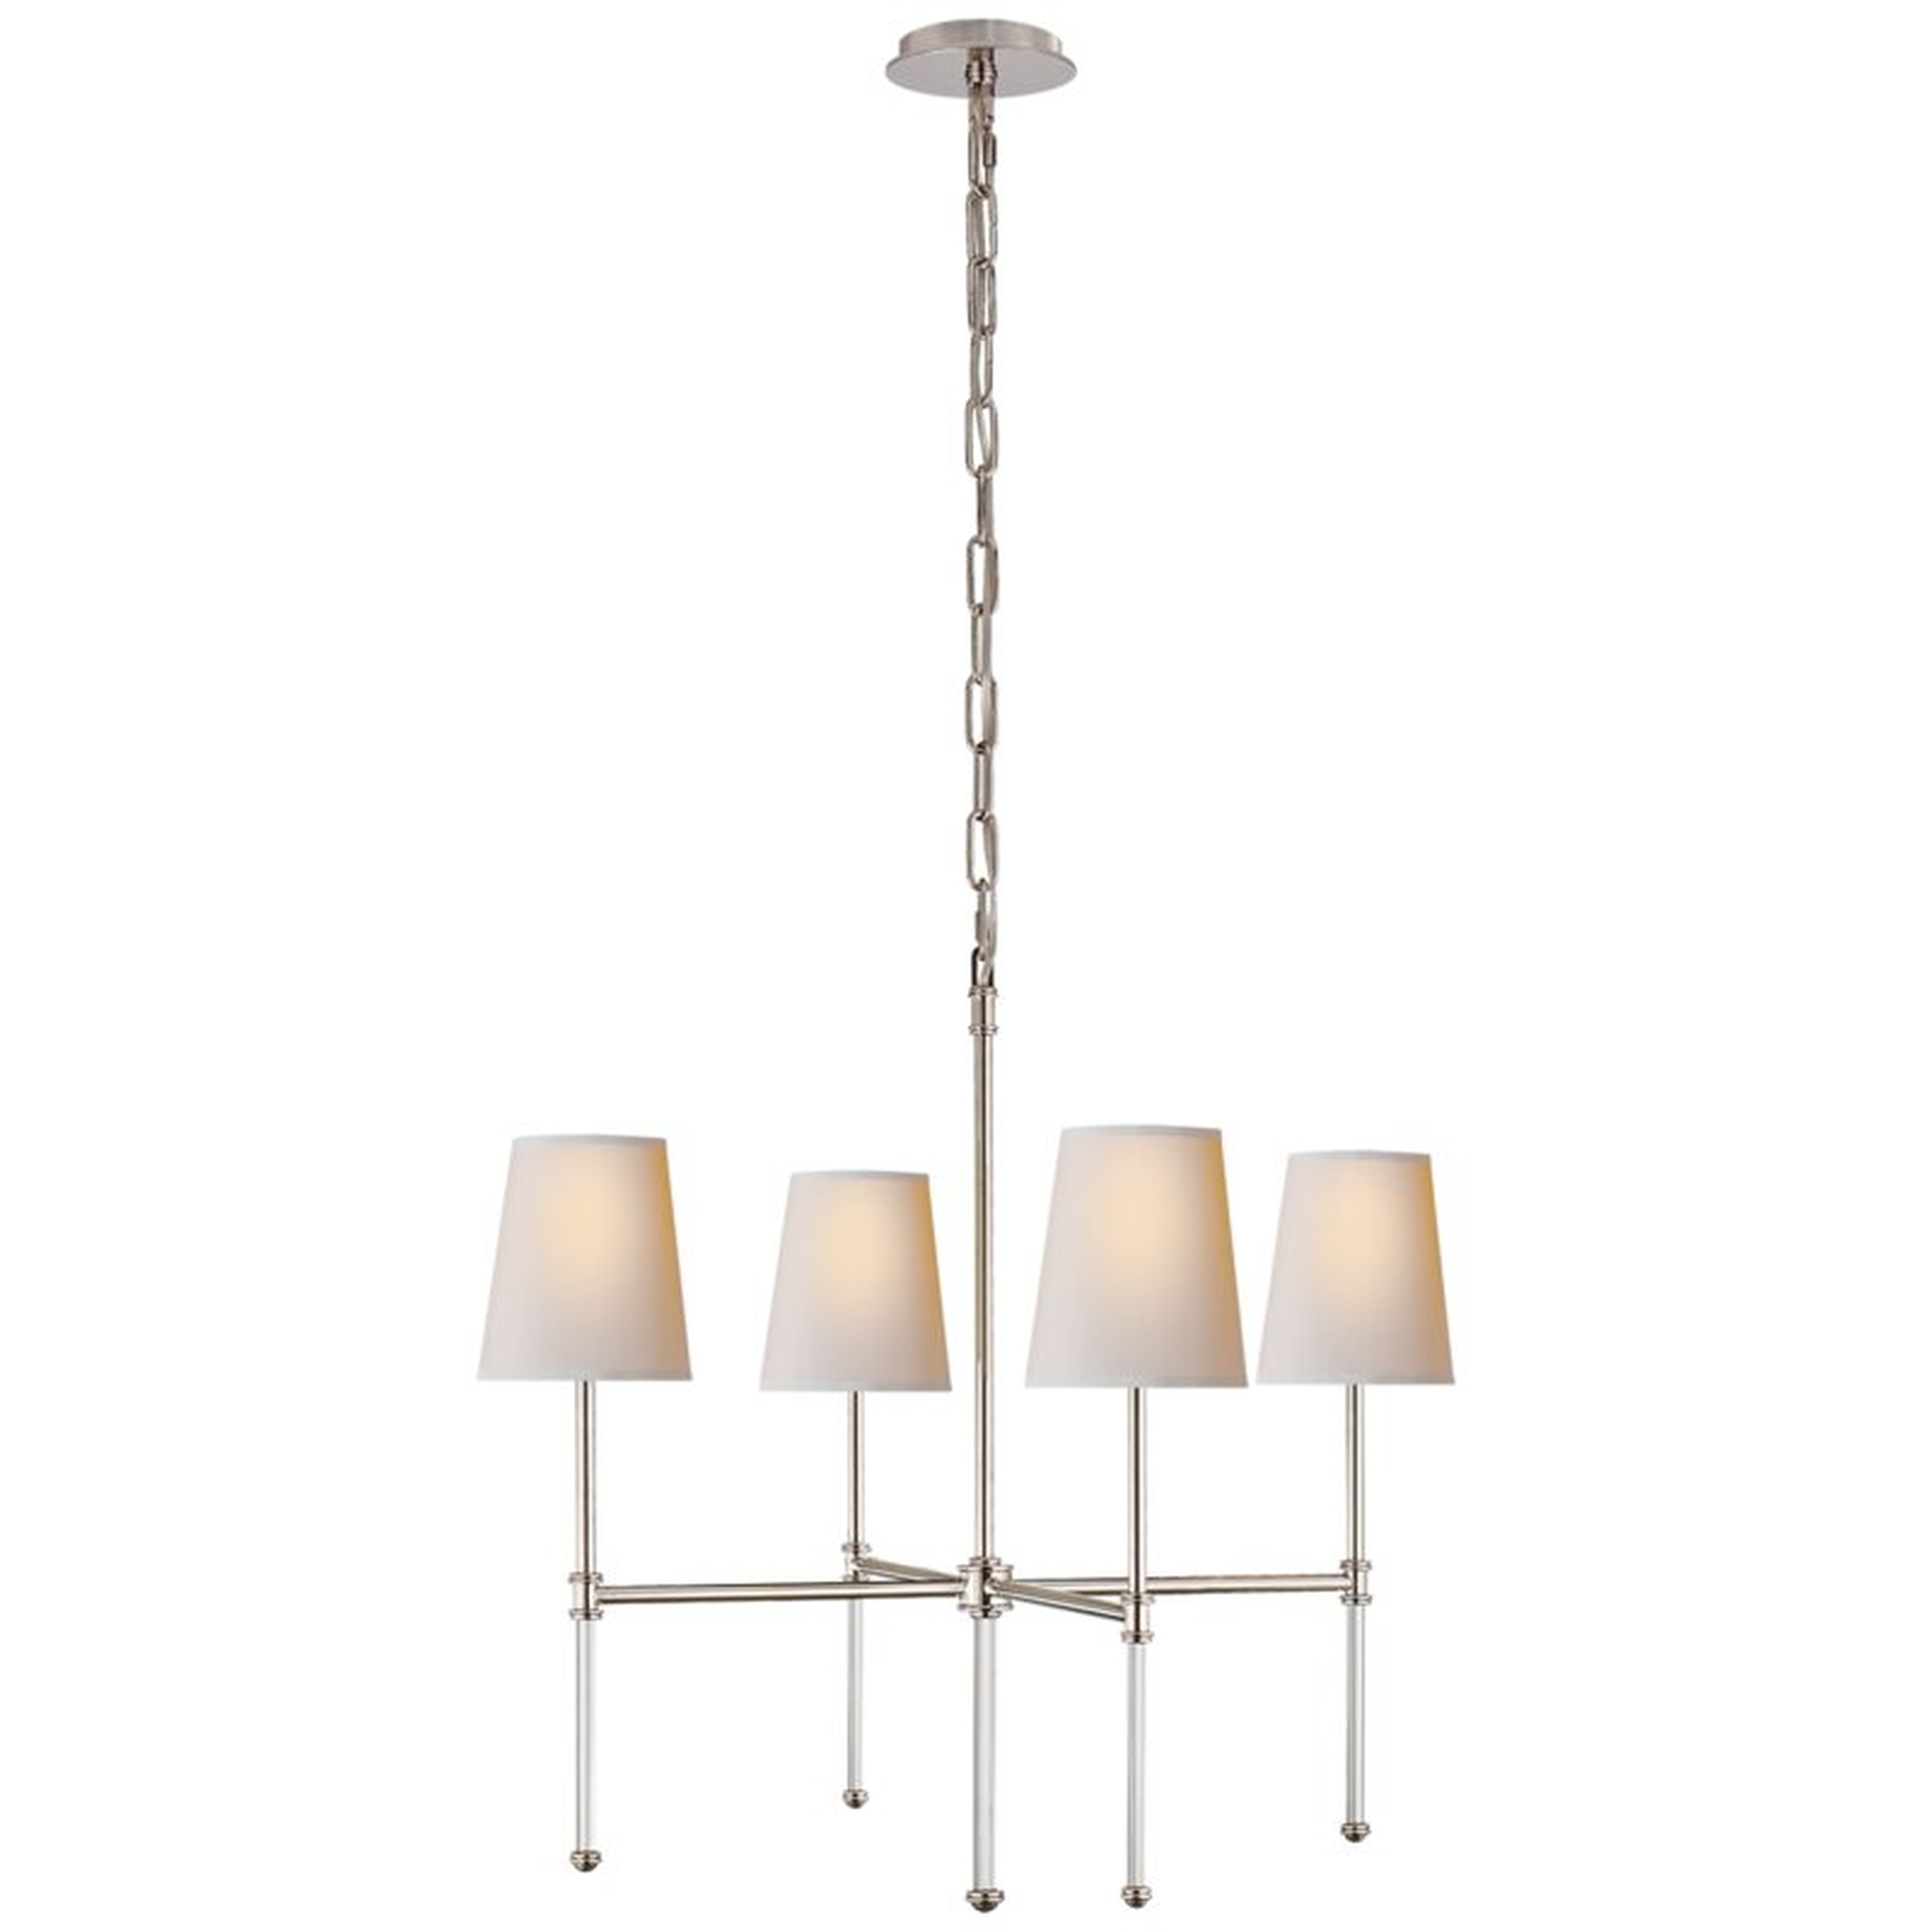 Visual Comfort Suzanne Kasler 4 - Light Shaded Classic / Traditional Chandelier Finish: Polished Nickel - Perigold